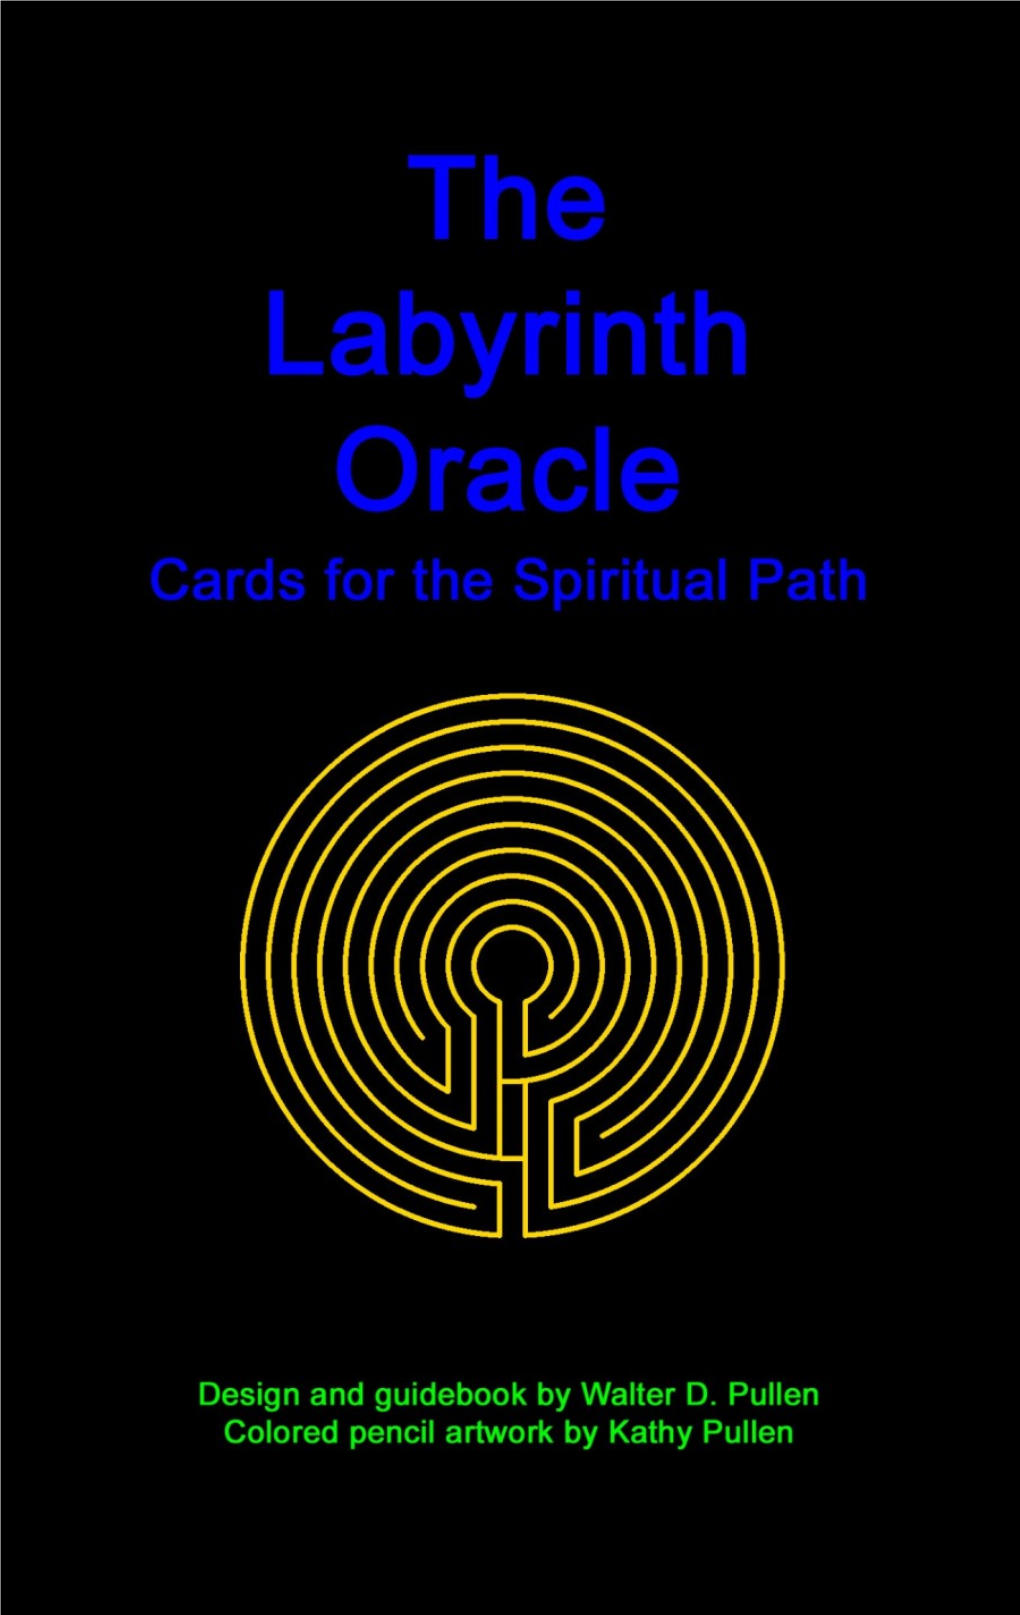 The Labyrinth Oracle